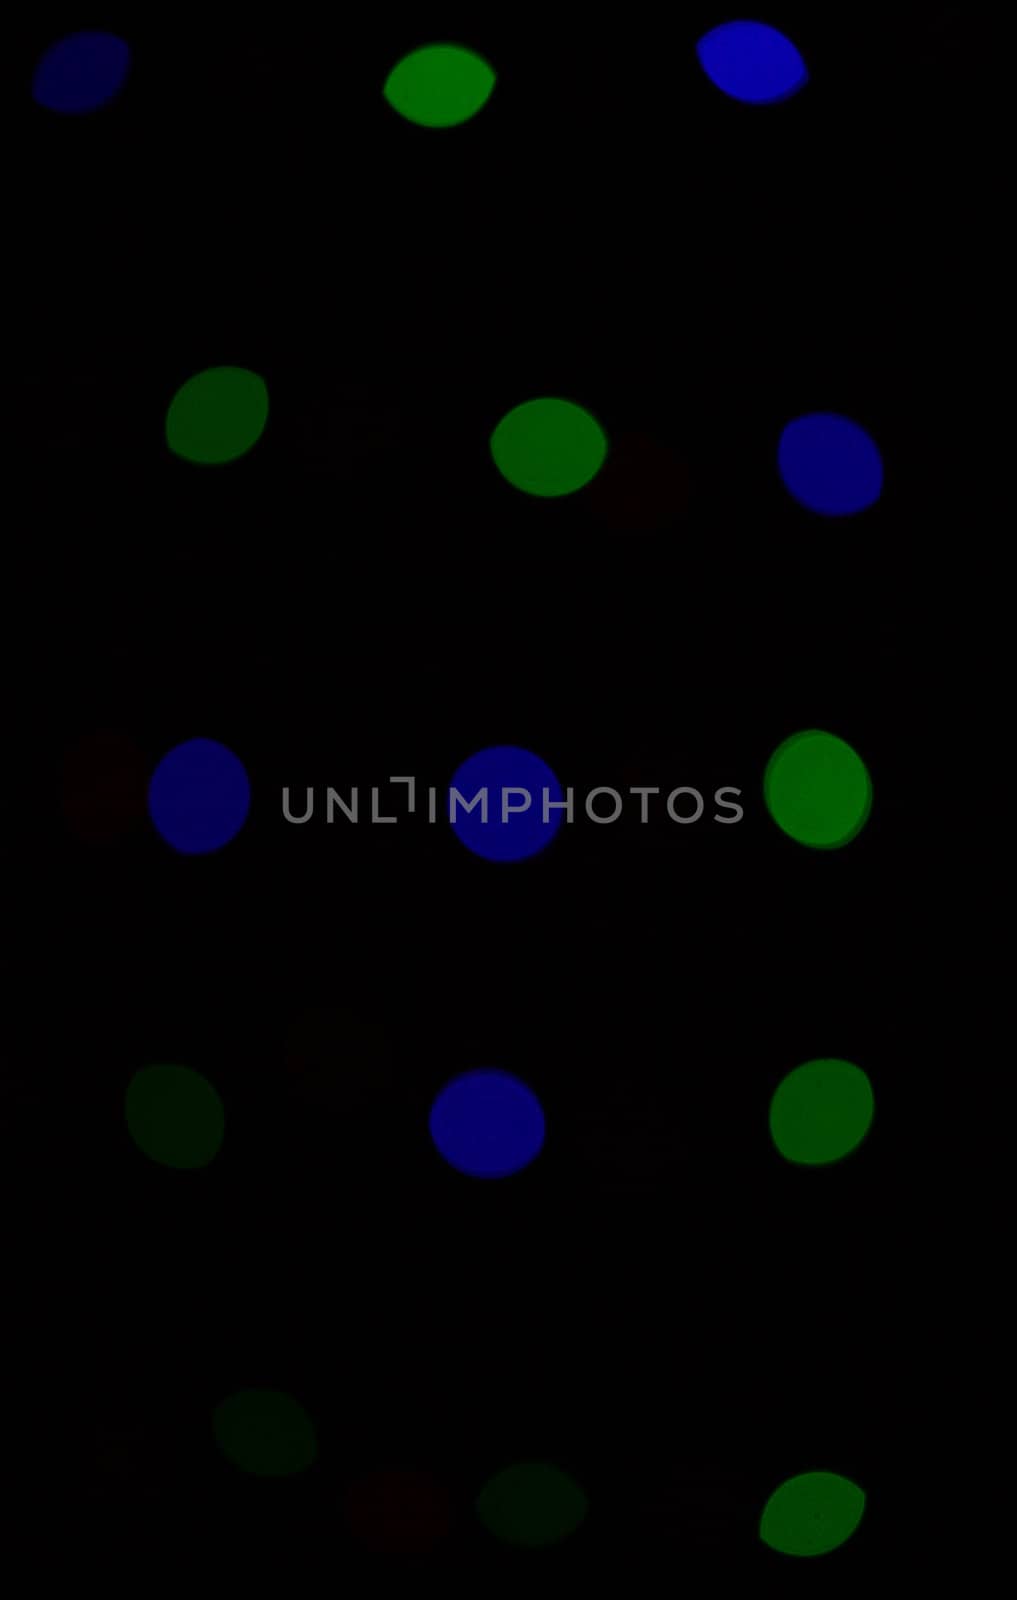 blurred lights abstract color background